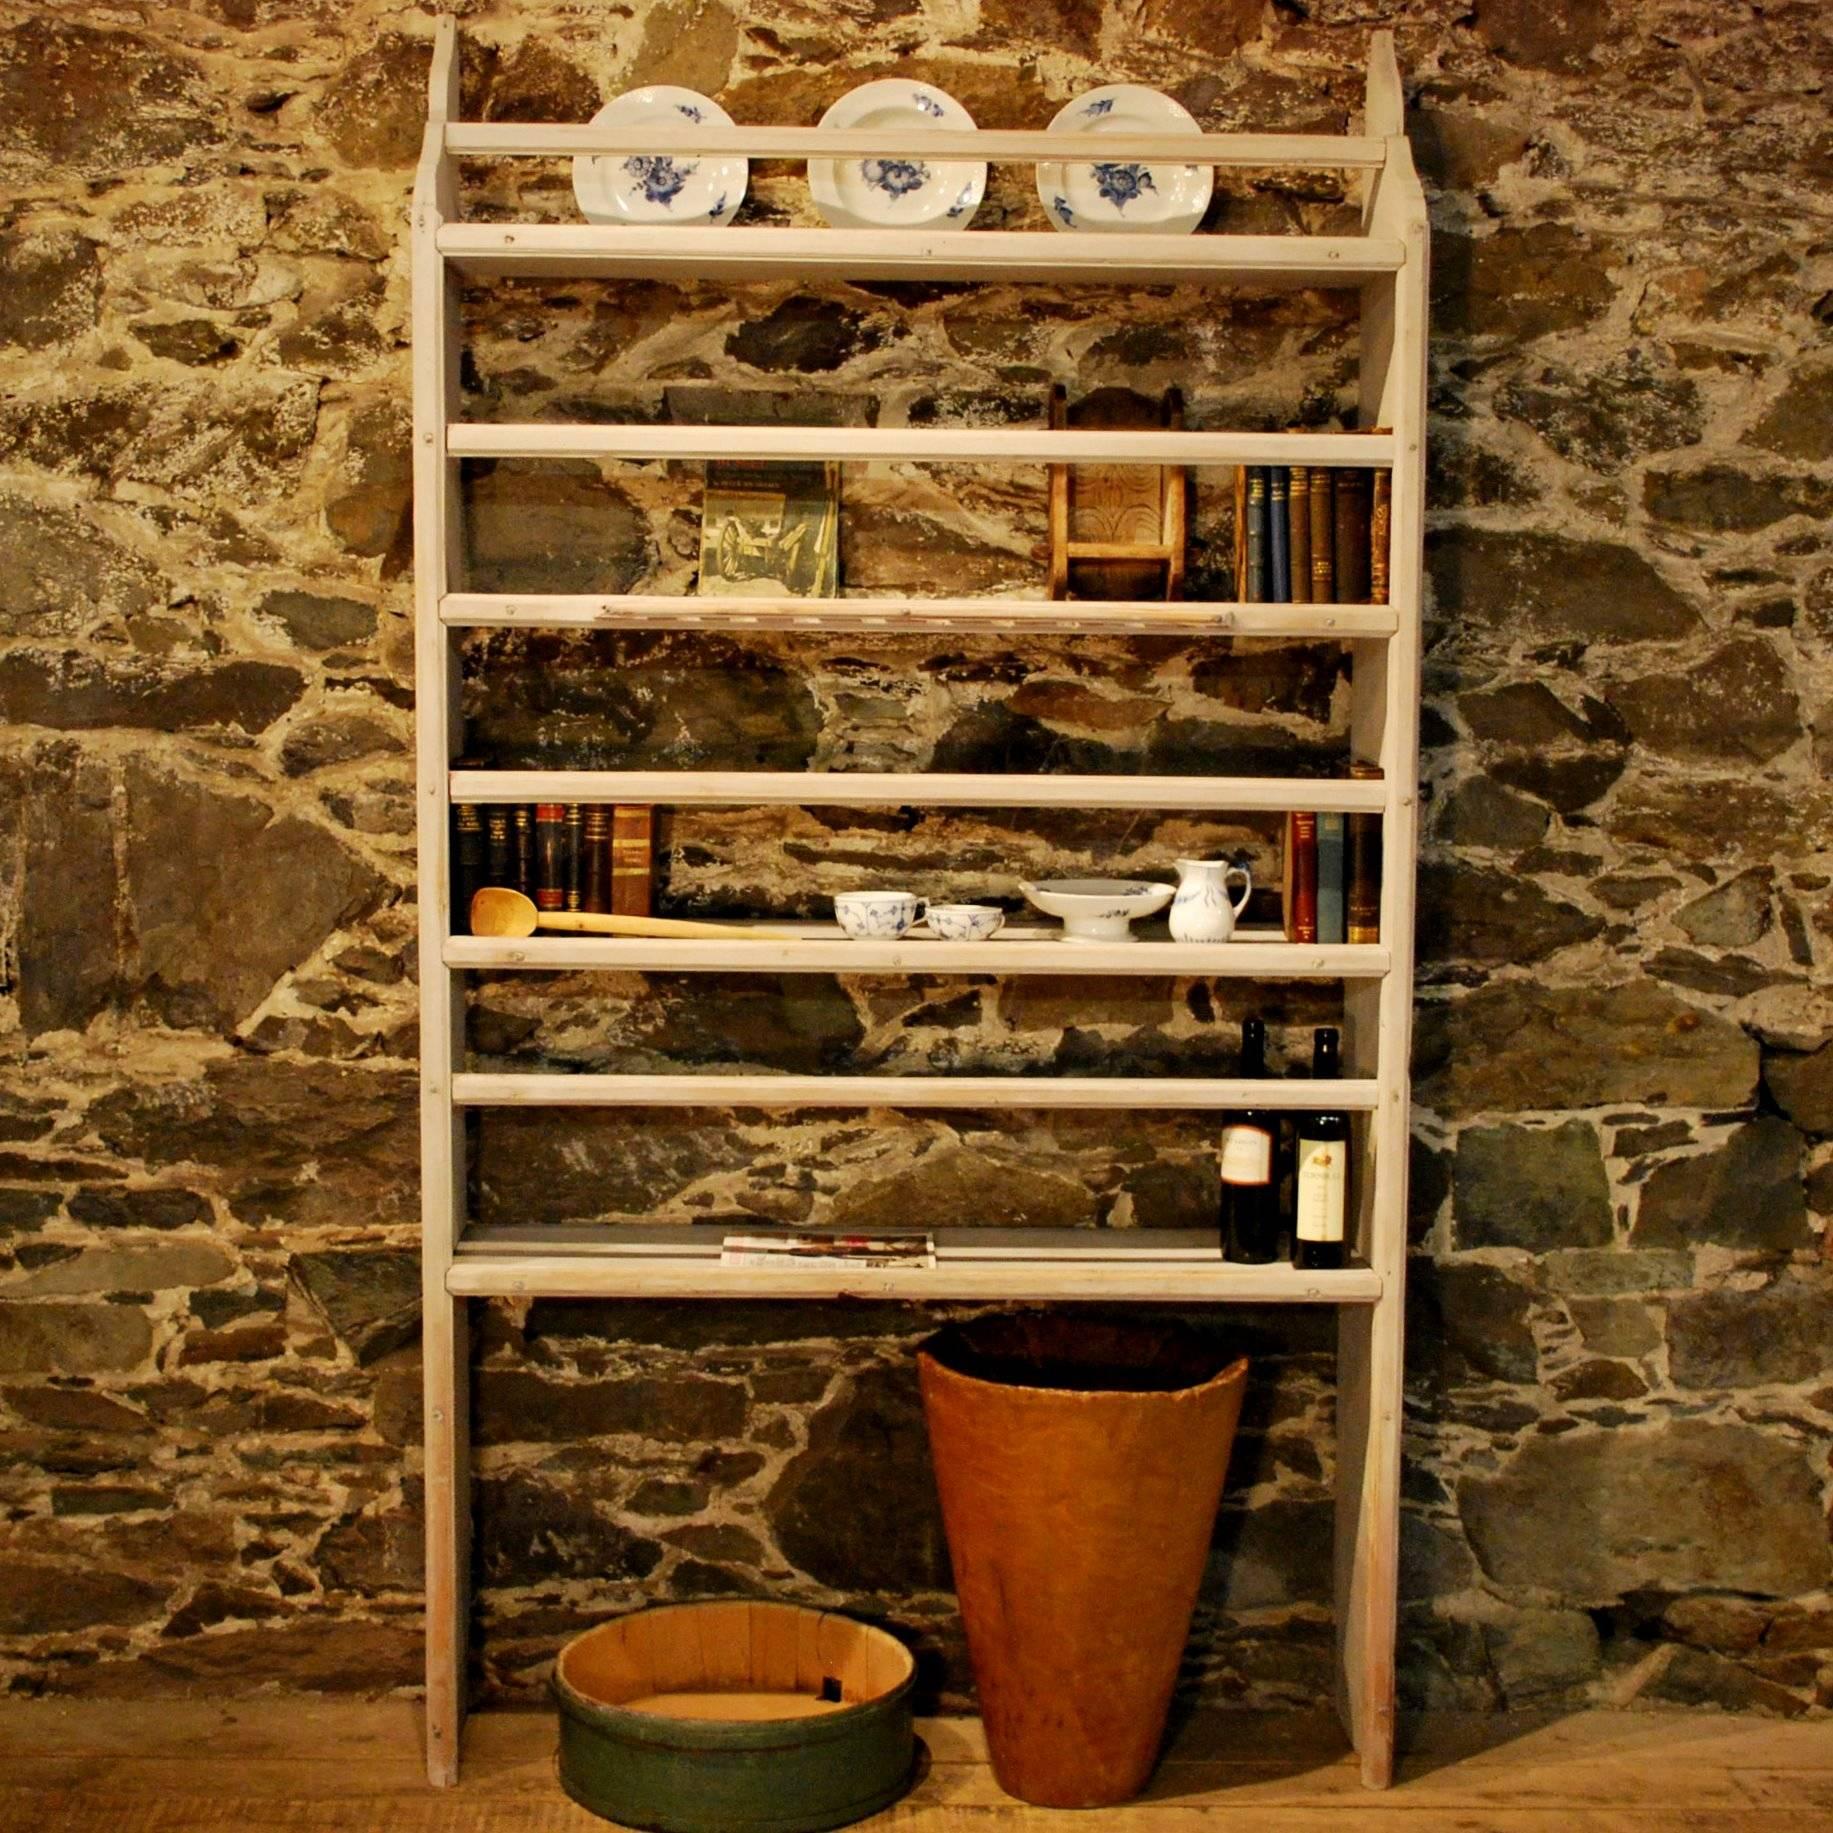 A rare antique pine open kitchen shelf, very well crafted and displaying a spoon shelf, unusual large size and warm color and patina of age. With later Gustavian influenced paintwork.